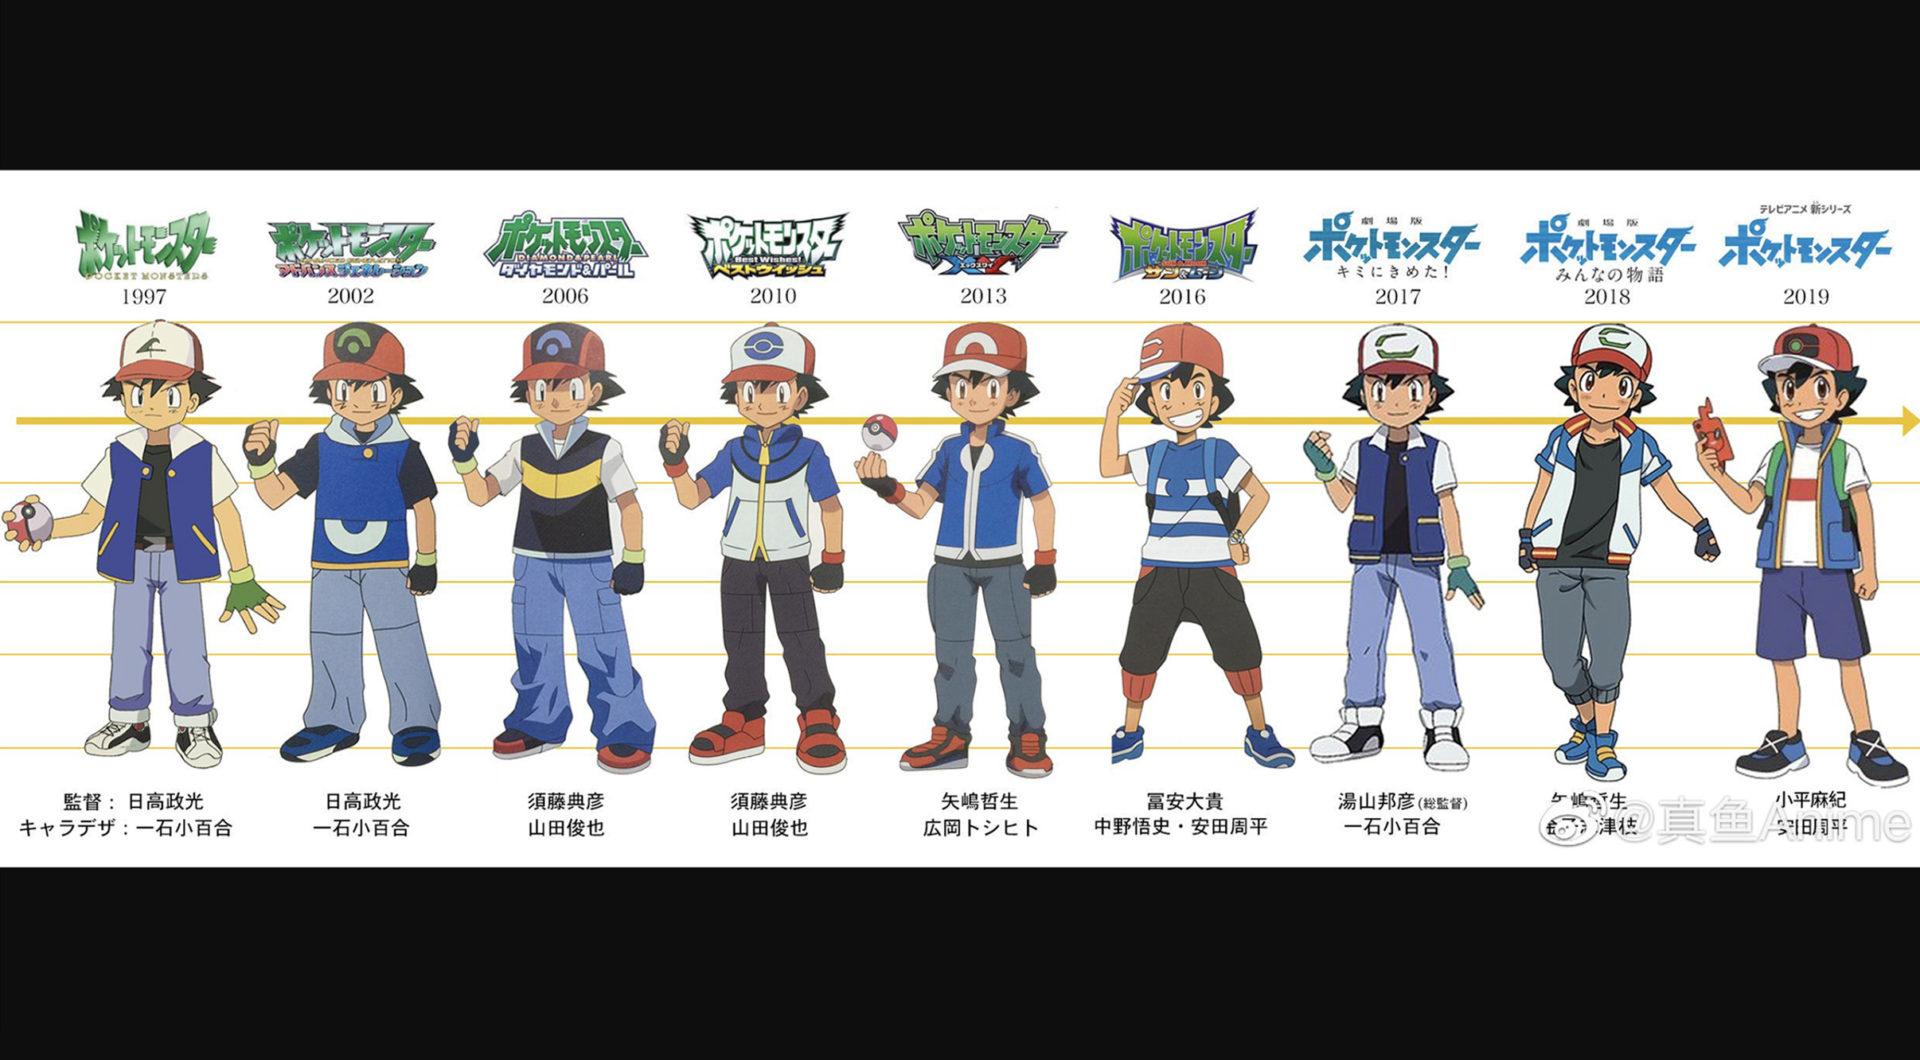 Screenshot of Pokemon Anime protagonist Ash Ketchum design changes over the years.